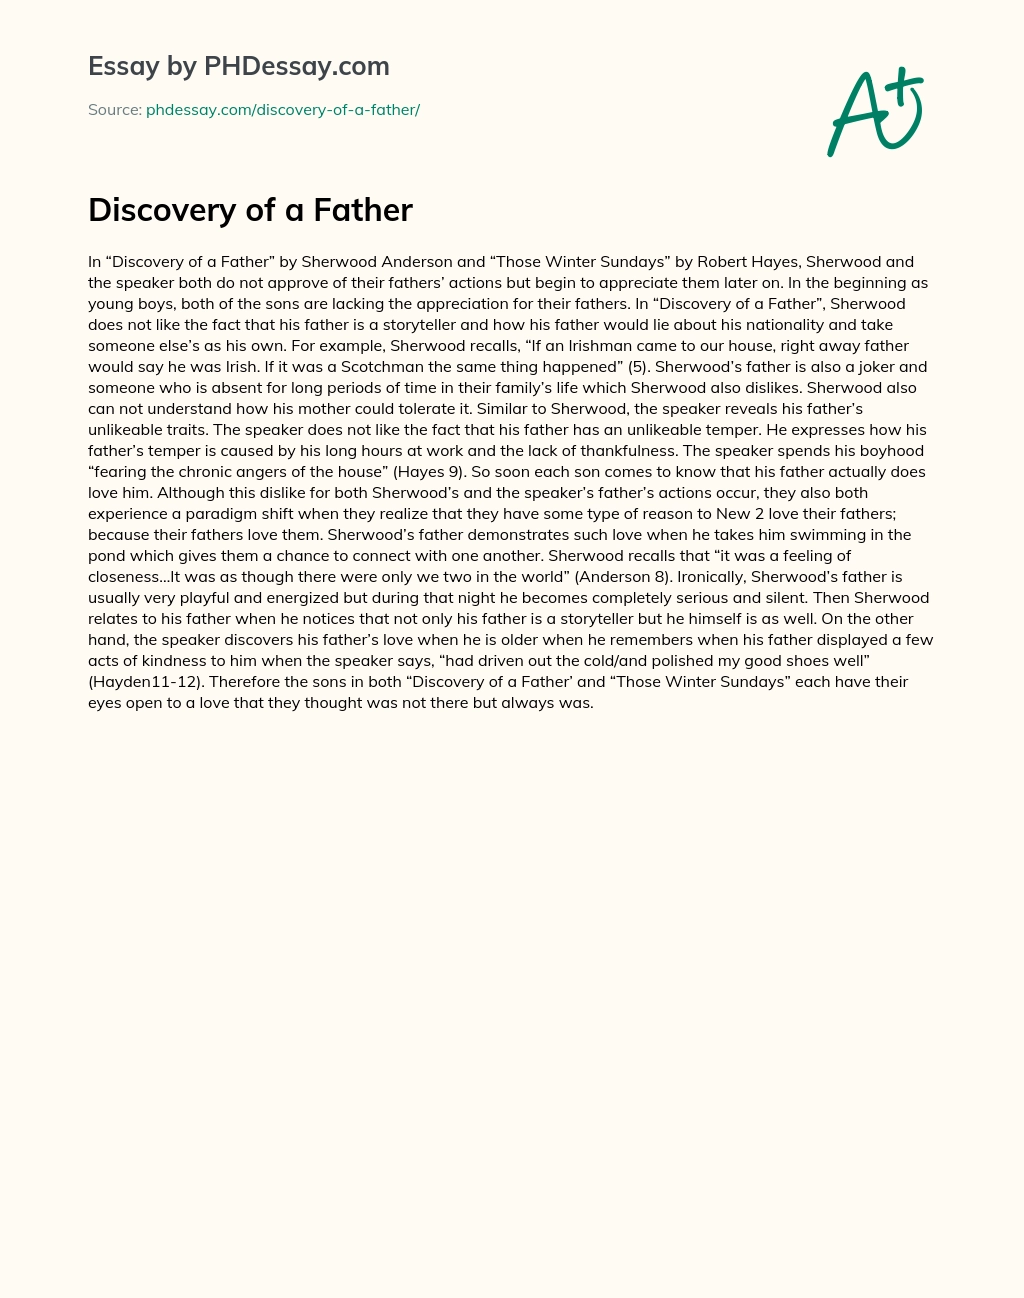 Discovery of a Father essay